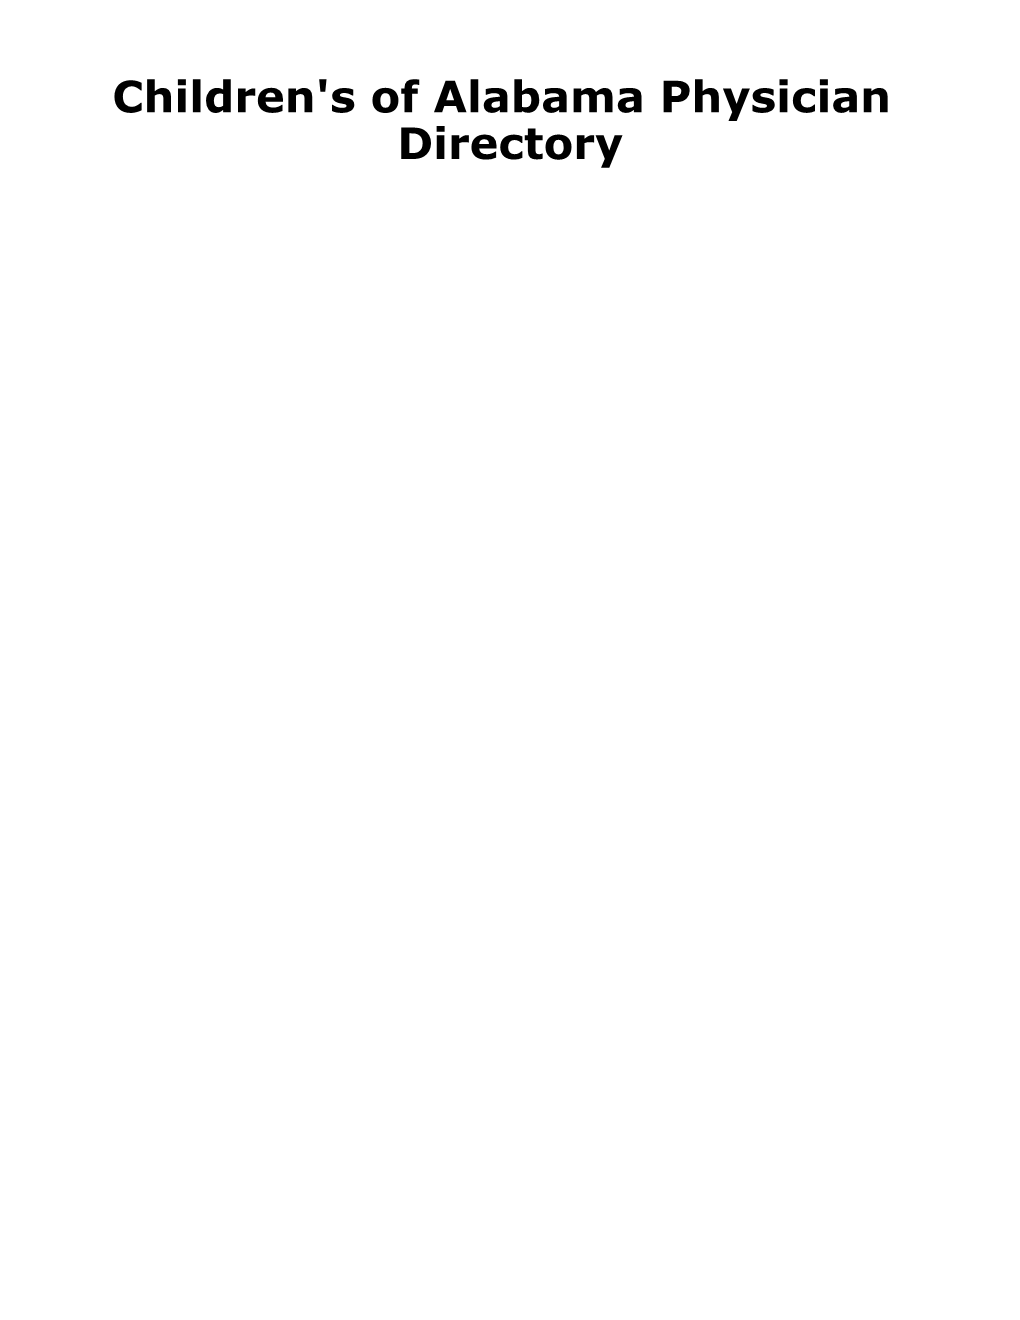 Children's of Alabama Physician Directory Table of Contents